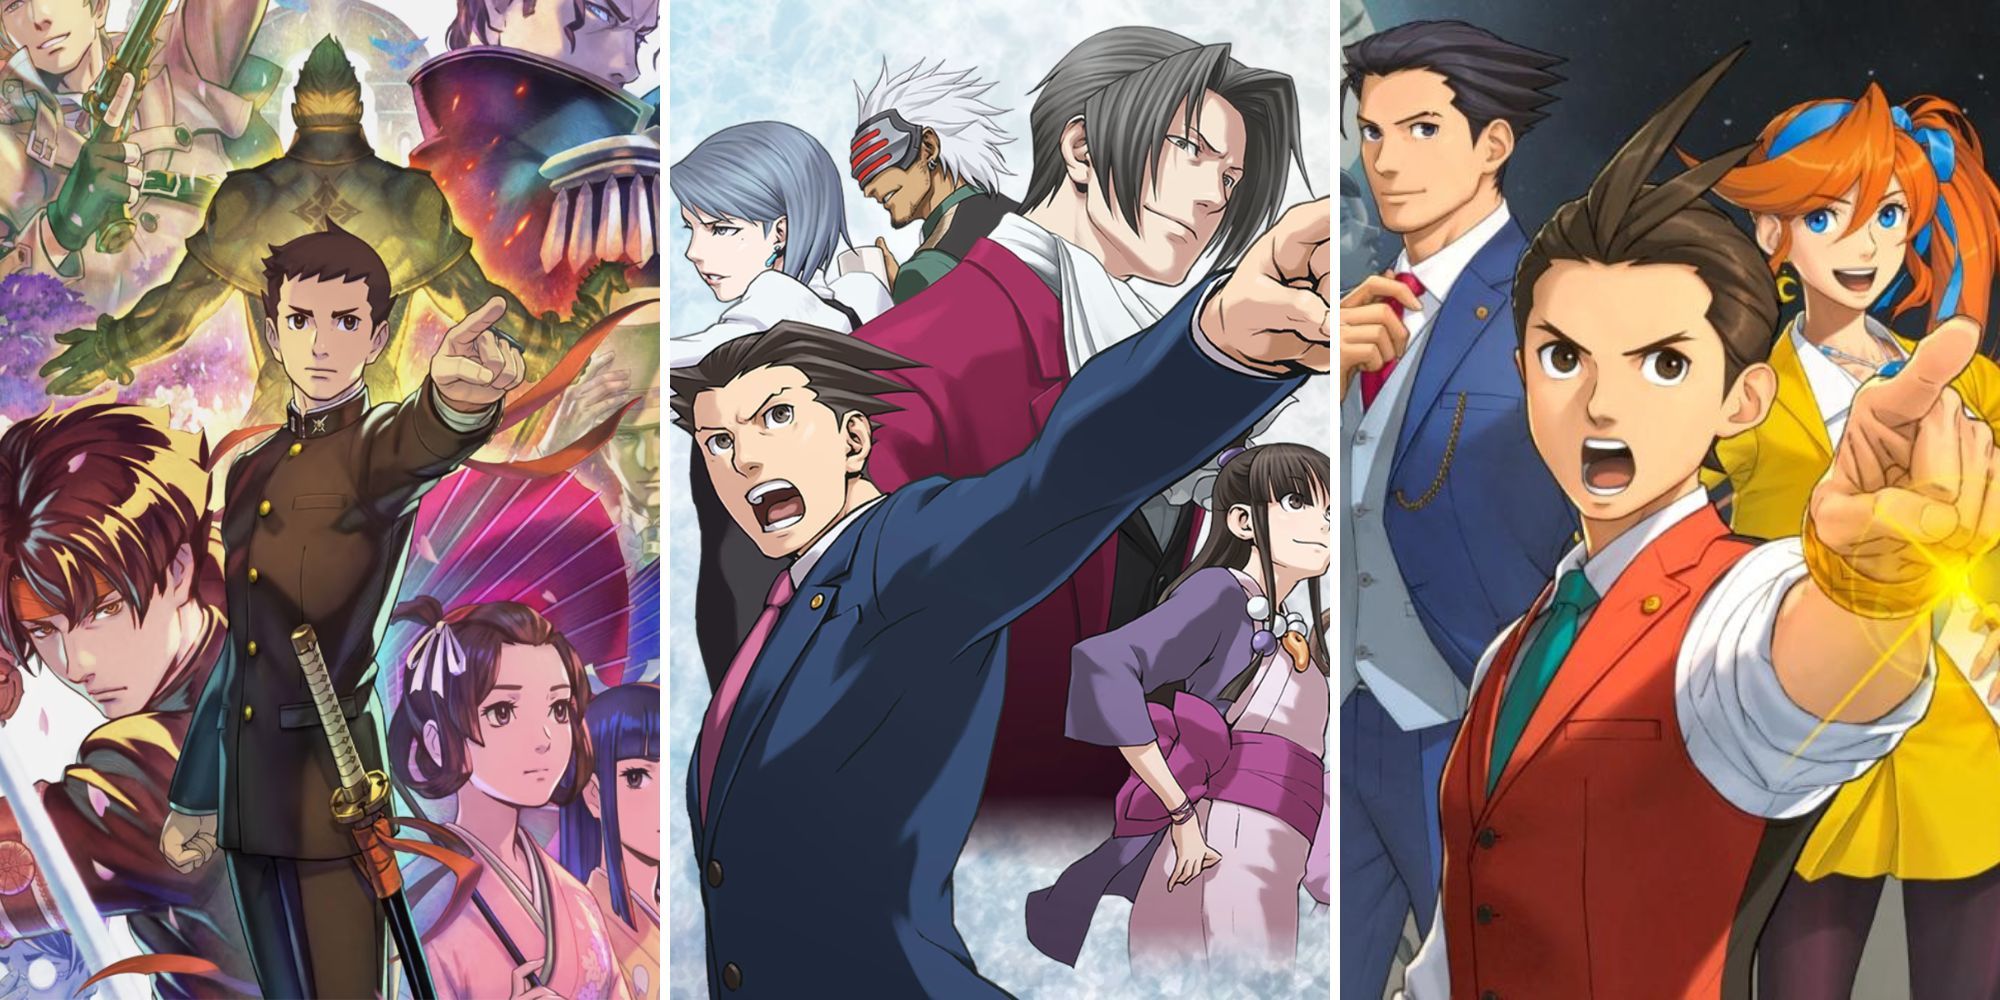 Ryunosuke points ahead, Phoenix Wright points and yells, Apollo Justice points in front of Phoenix and Athena